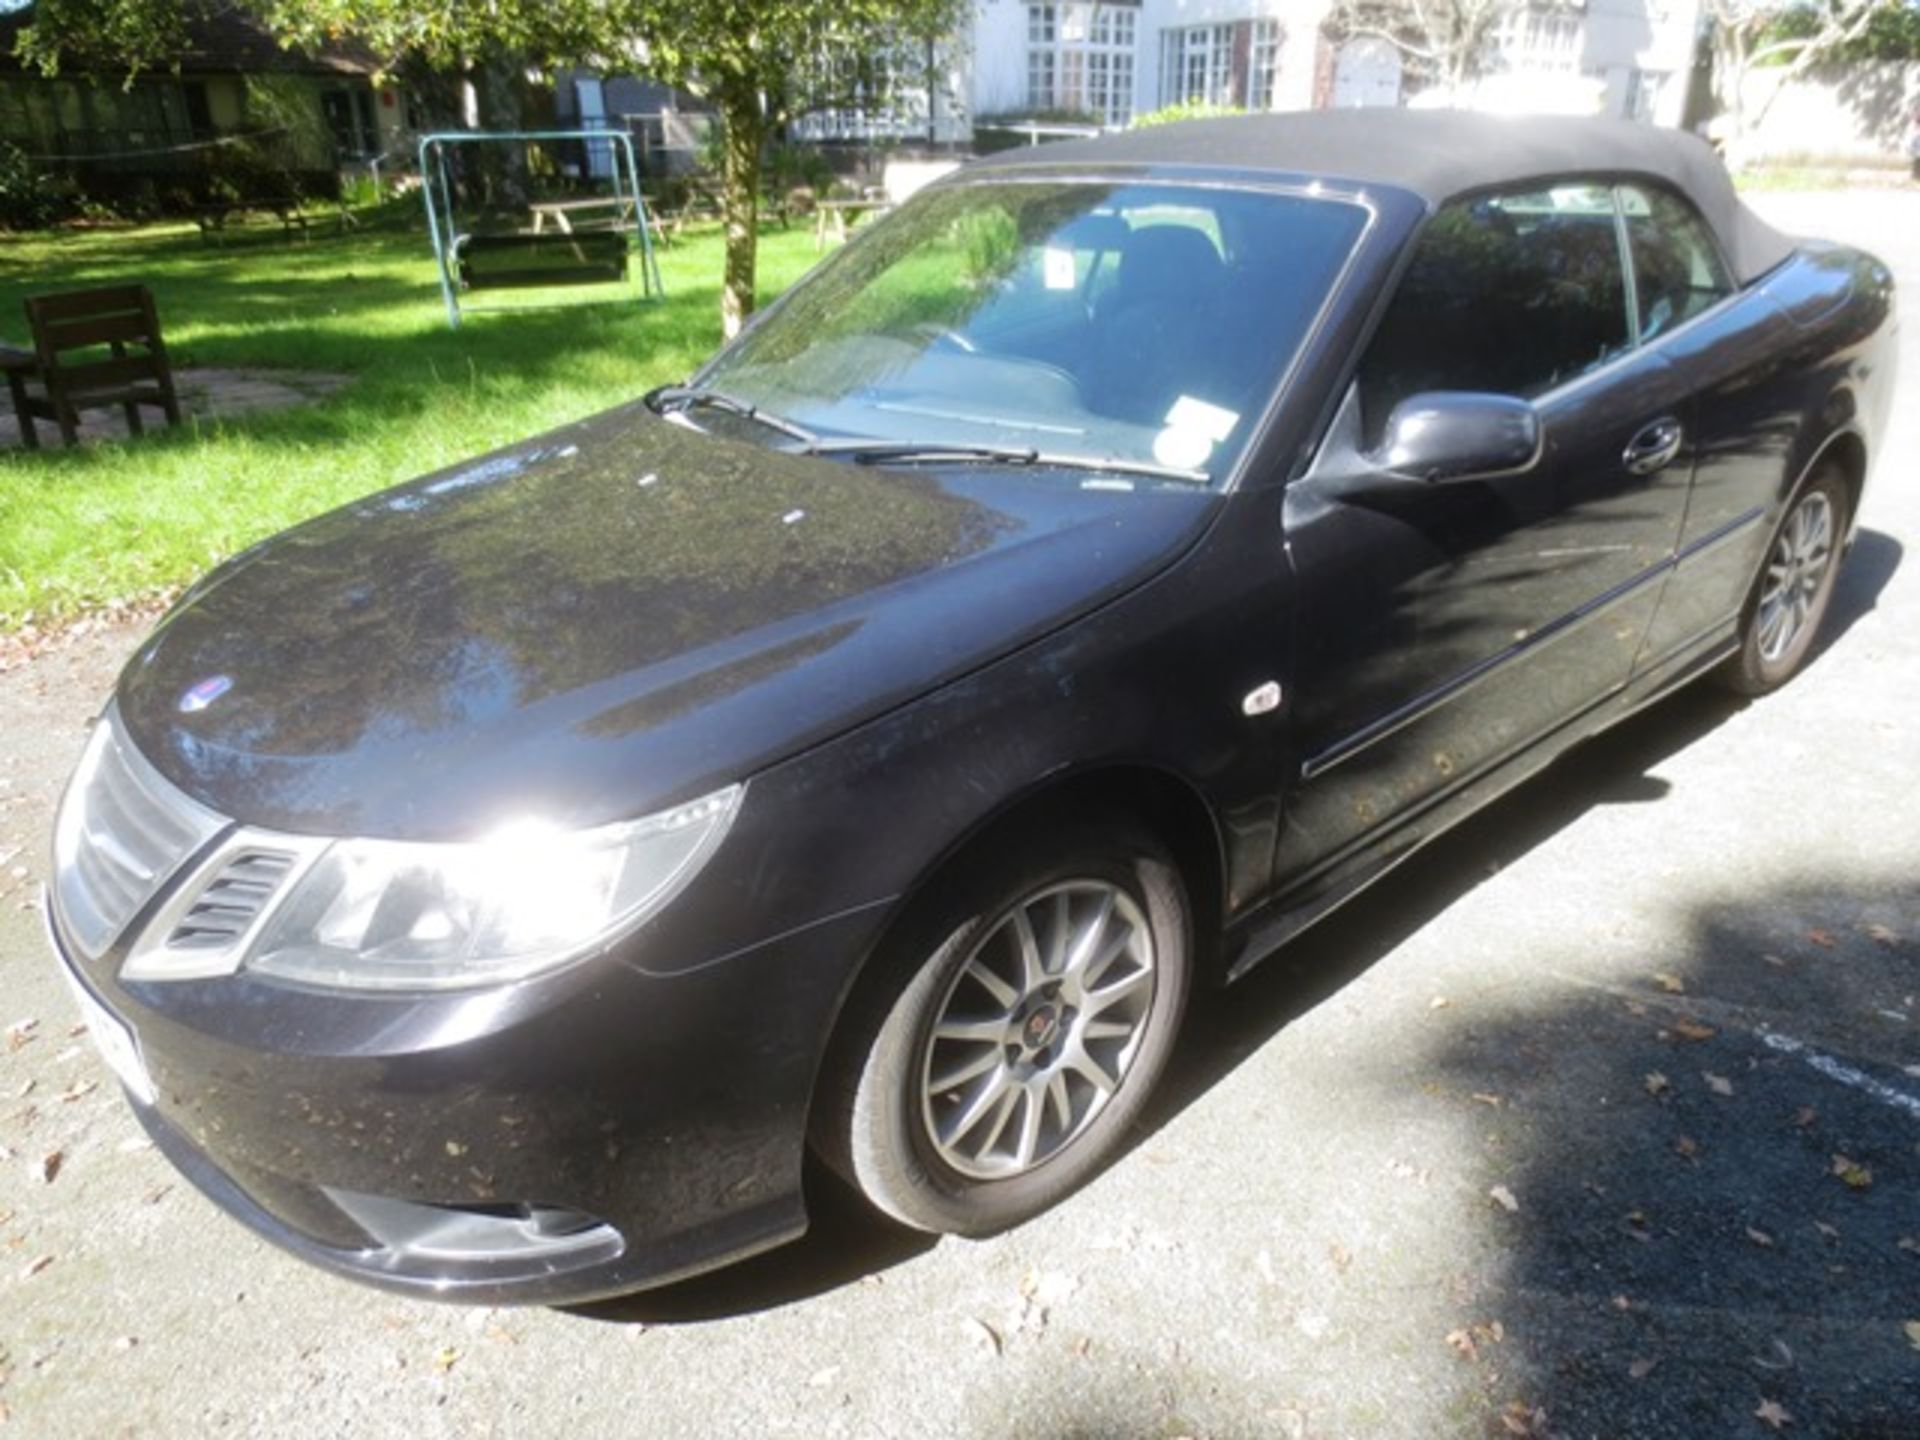 Saab 9-3 Linear SE TID 150 1910cc Diesel Automatic Convertible, leather seats, A/C, power roof, - Image 6 of 23